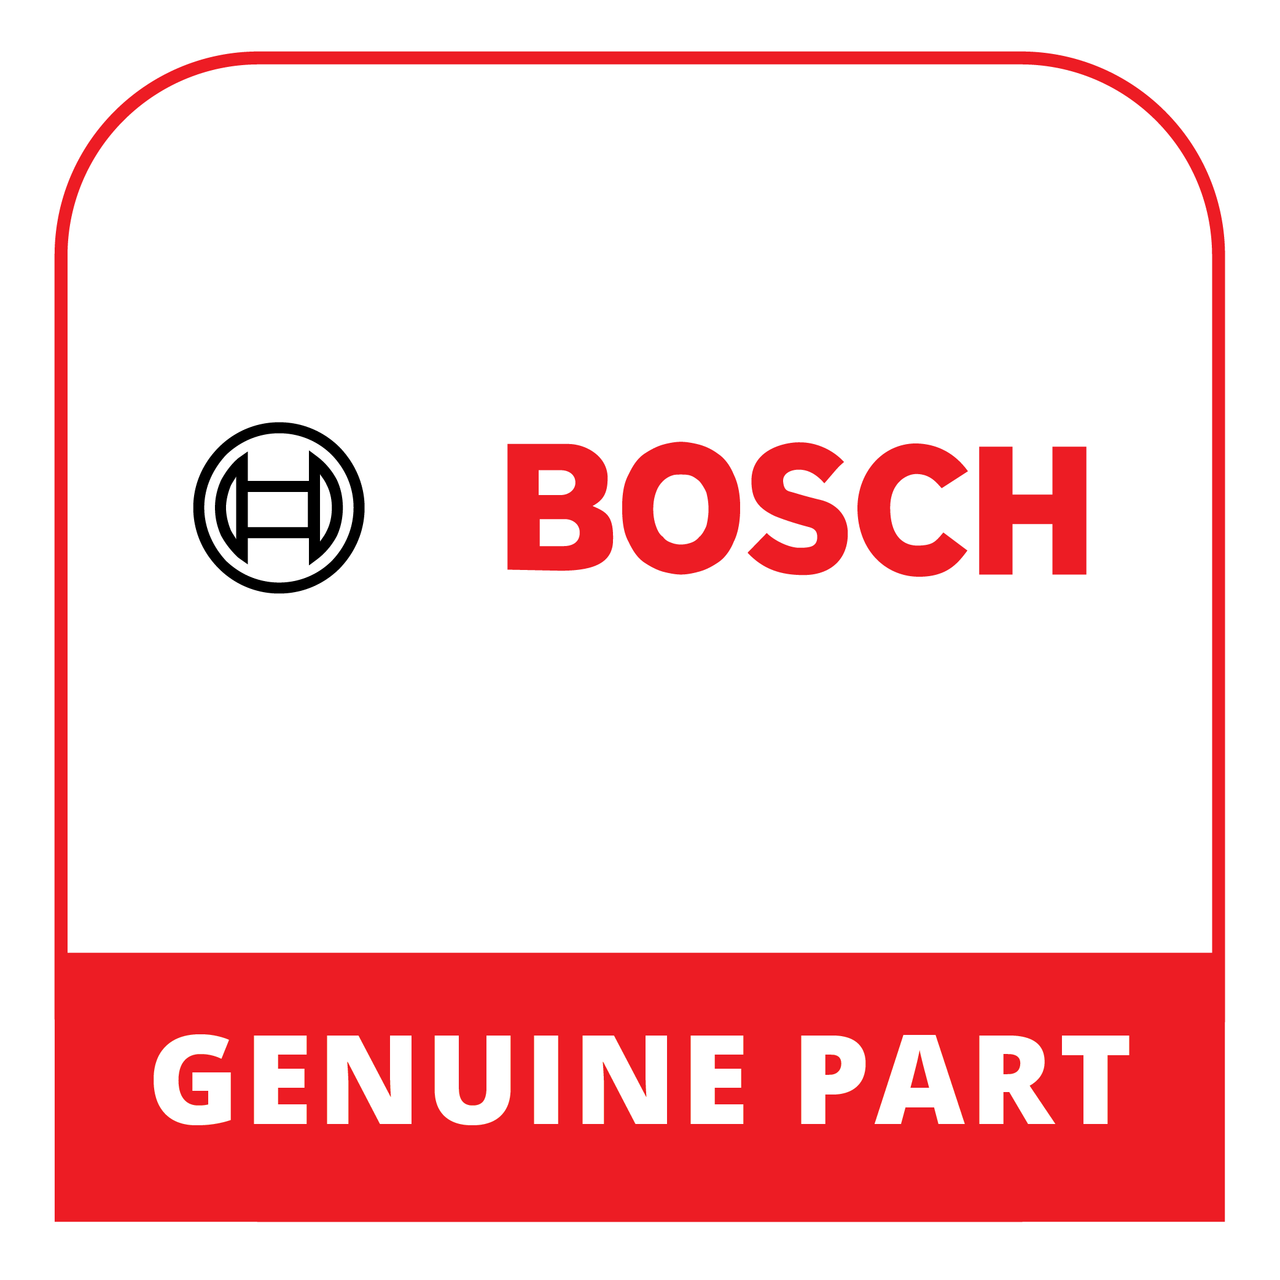 Bosch (Thermador) 00312007 - Care Product - Genuine Bosch (Thermador) Part